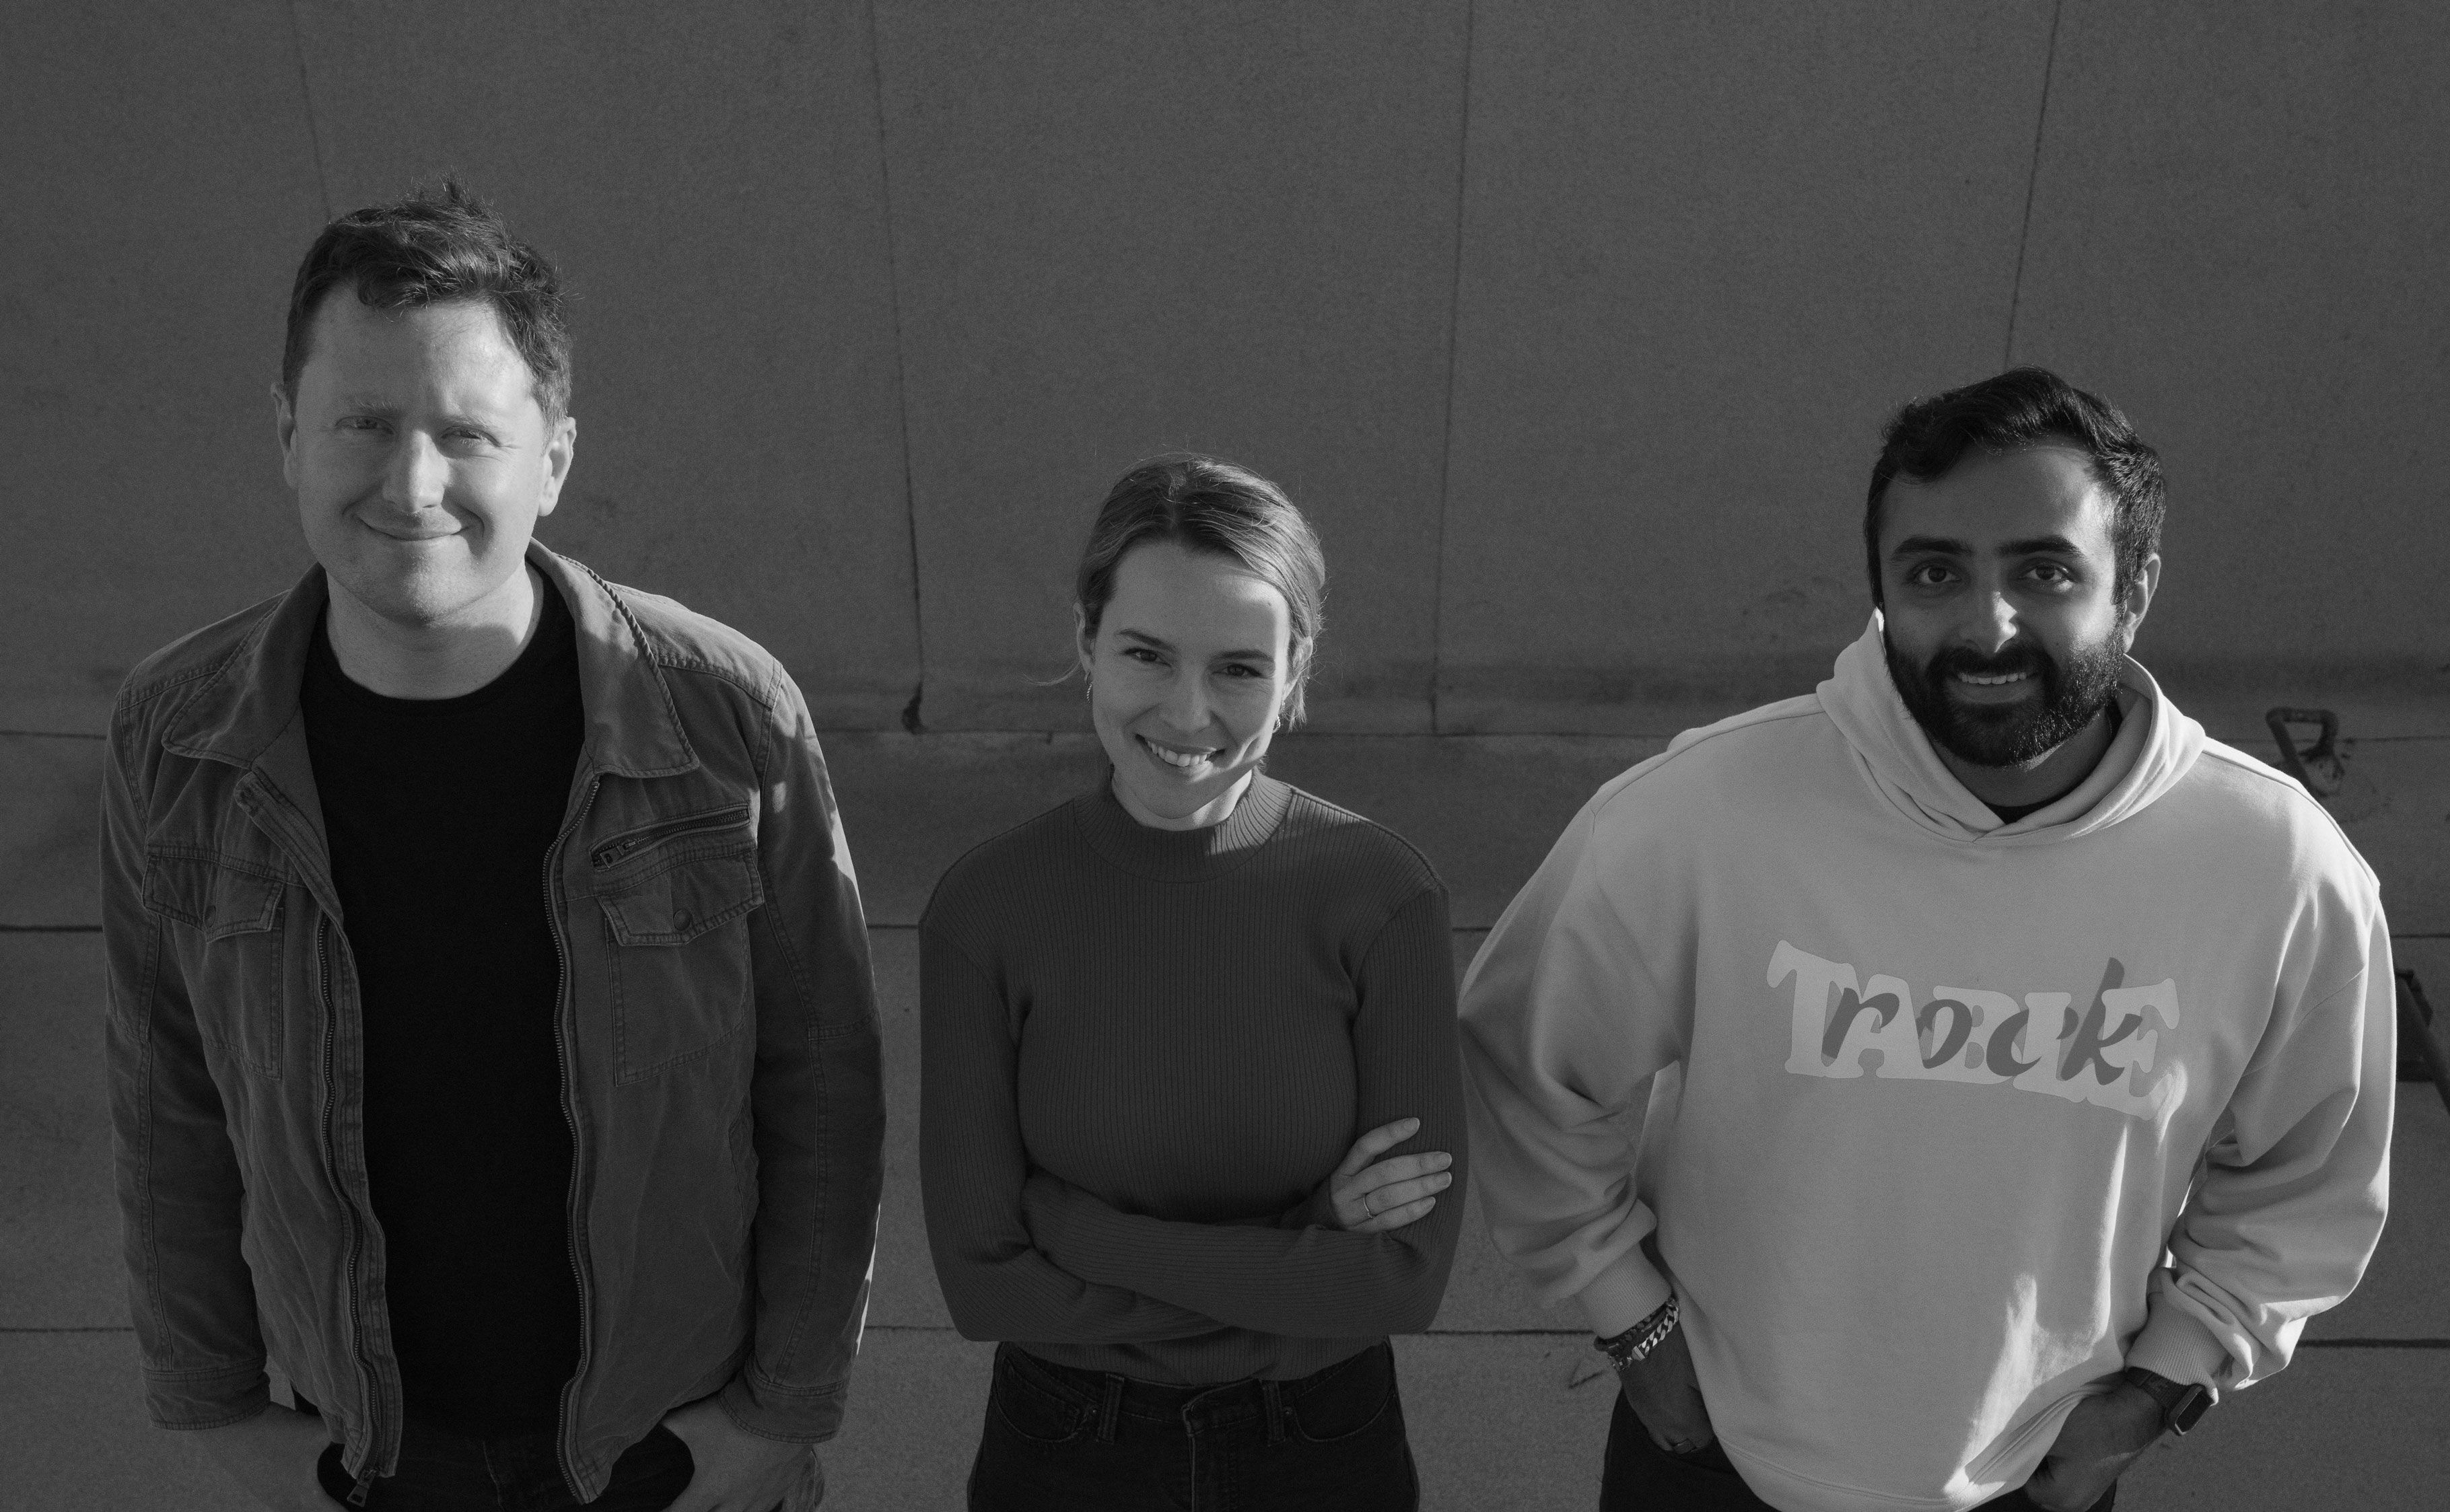 CEO of Northwood, Bridgit Mendler (center), with CTO Griffin Cleverly (left) and Head of Software Shaurya Luthra (right). (Image credit: Northwood)